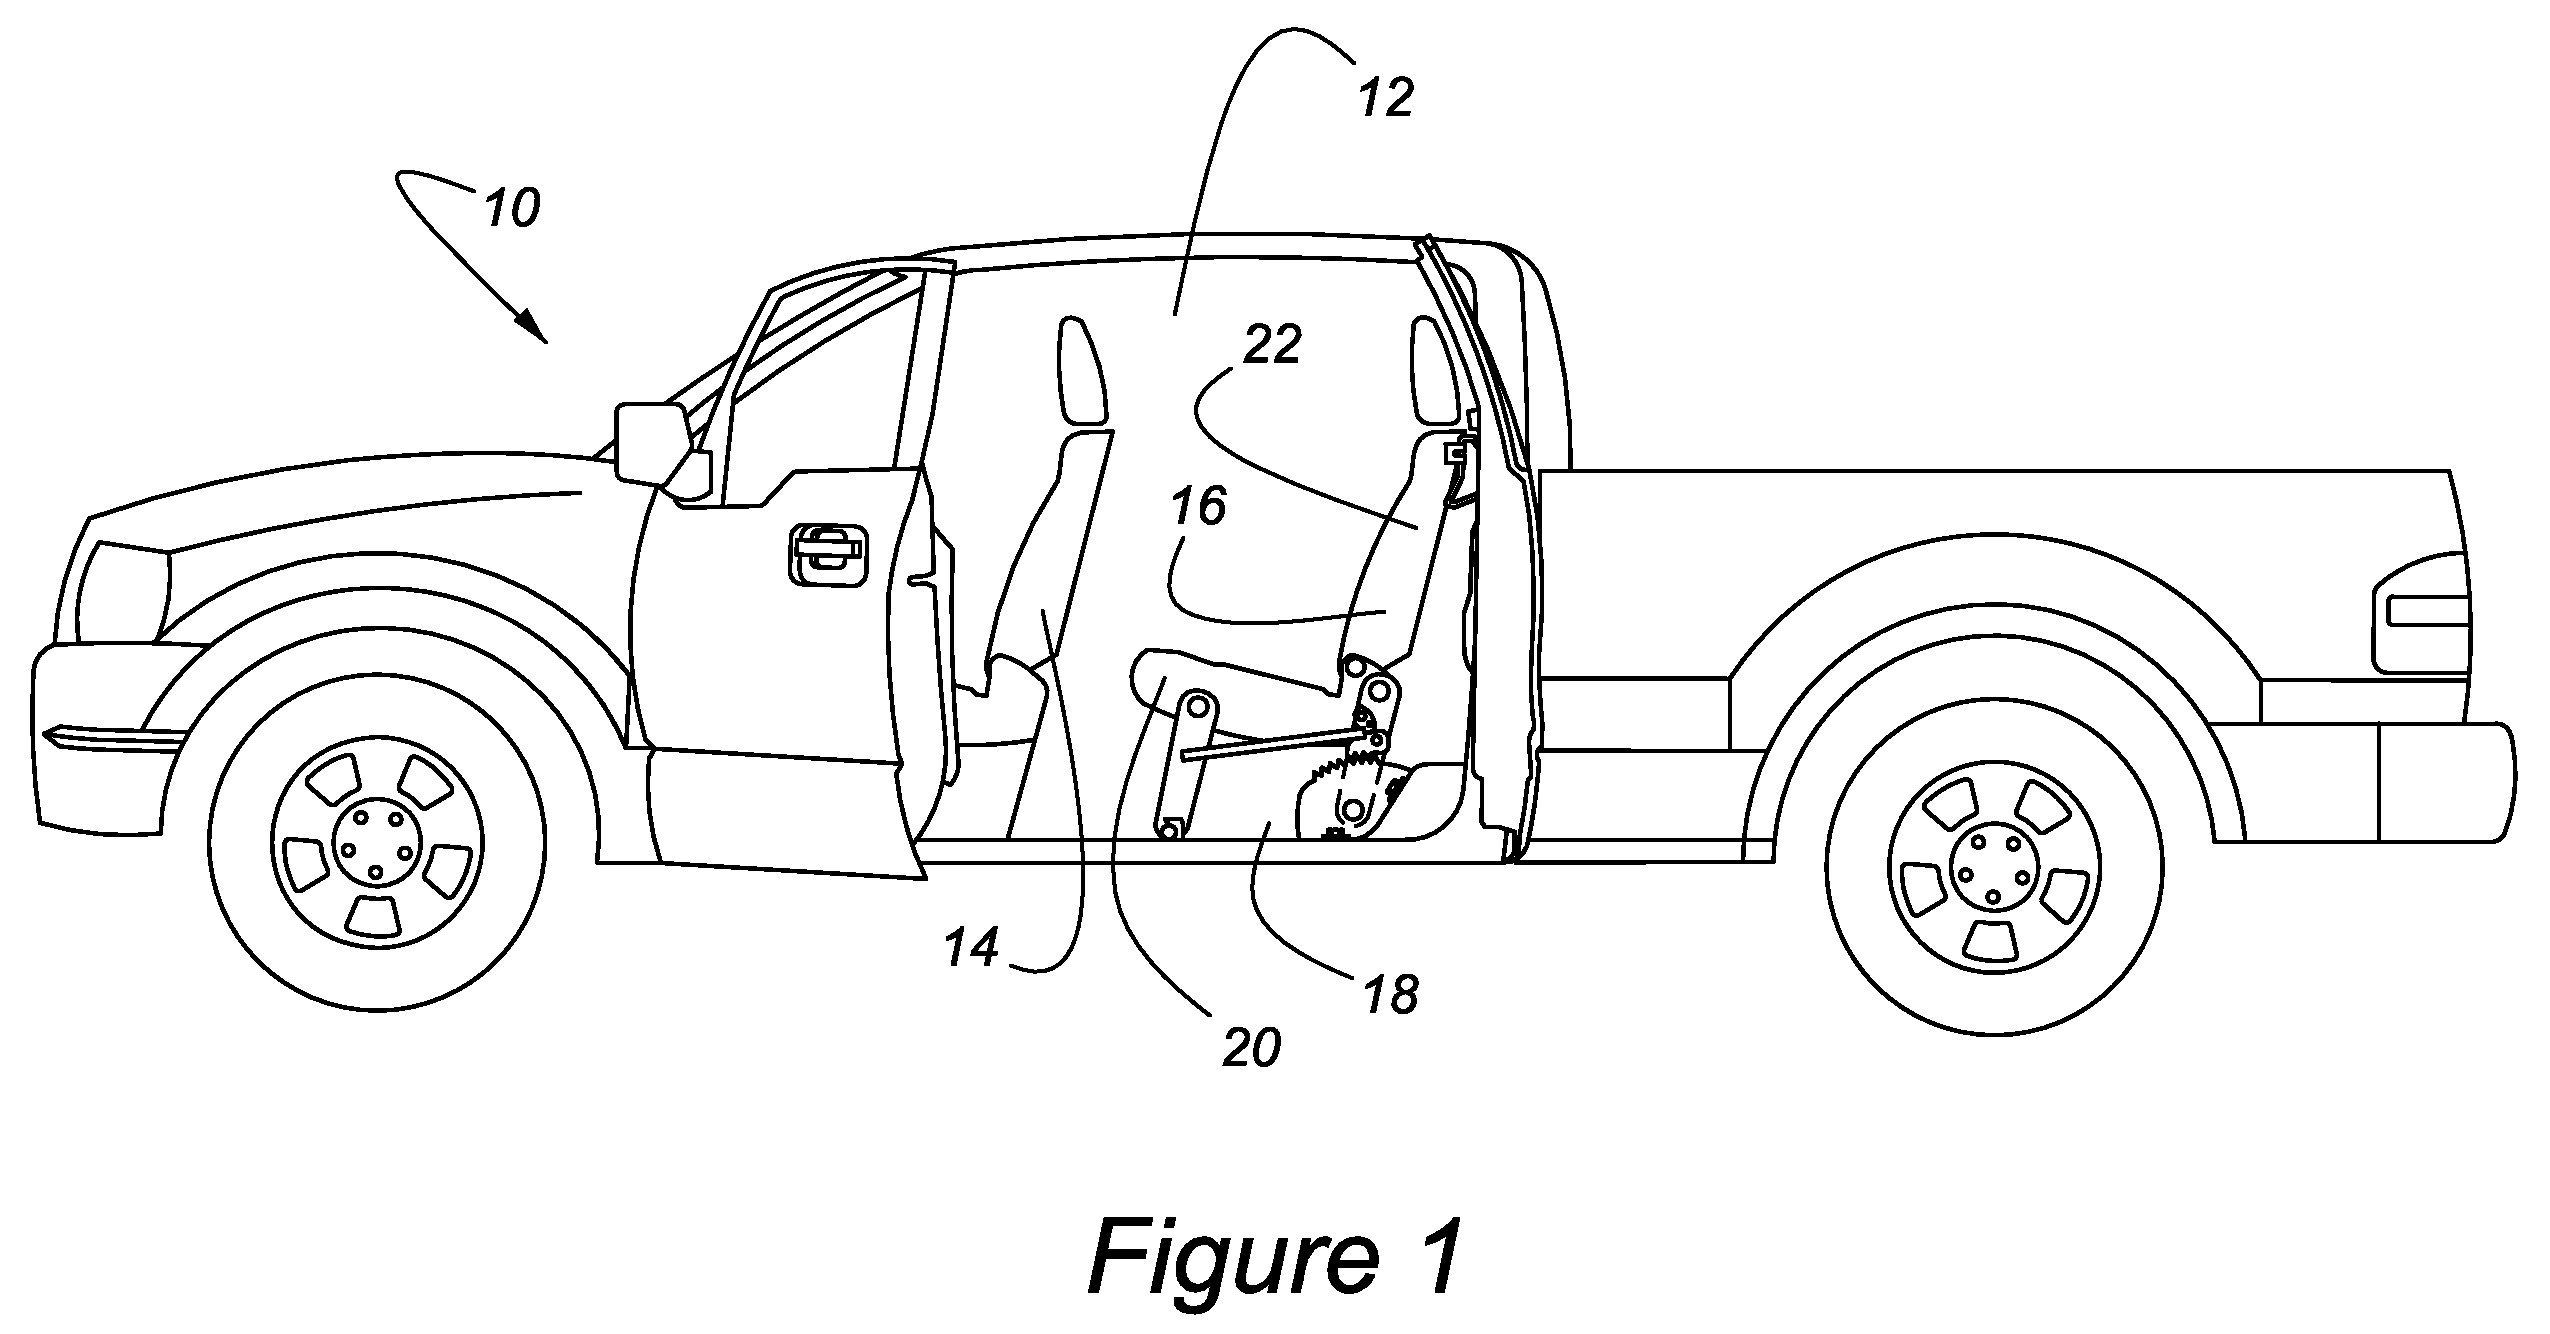 Reclining rear seat for vehicle having four-bar link